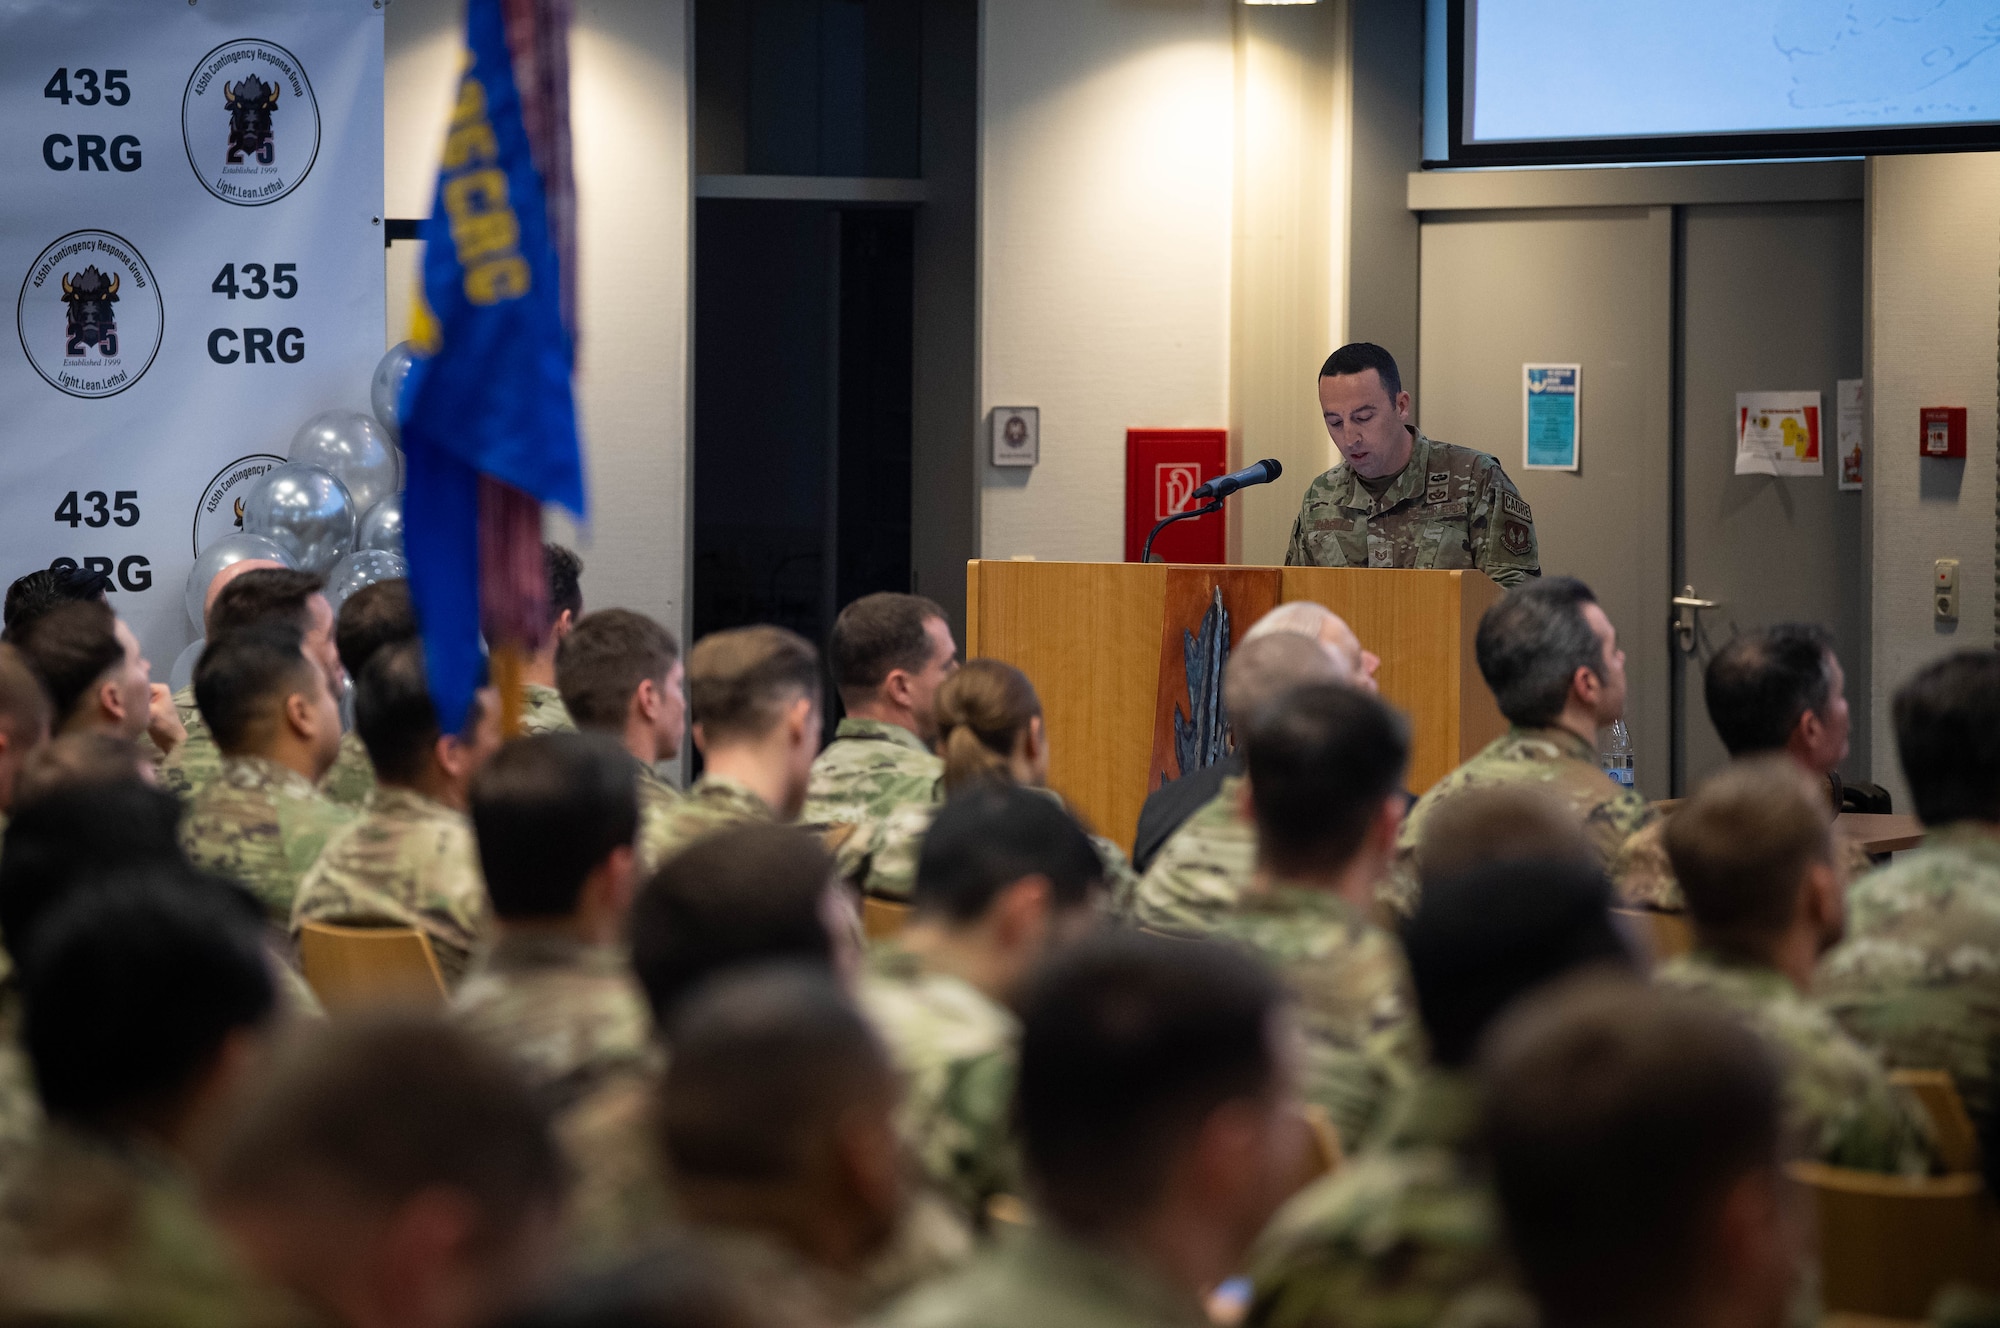 U.S. Air Force Tech. Sgt. Matt Clark, 435th Construction and Training Squadron power production contingency instructor, briefs Airmen assigned to the 435th Contingency Response Group on the history of the unit, at Ramstein Air Base, Germany, Feb. 26, 2024. Established on February 26th, 1999, the 435th CRG marked a significant milestone as it celebrated its 25th anniversary. (U.S. Air Force photo by Senior Airman Jared Lovett)